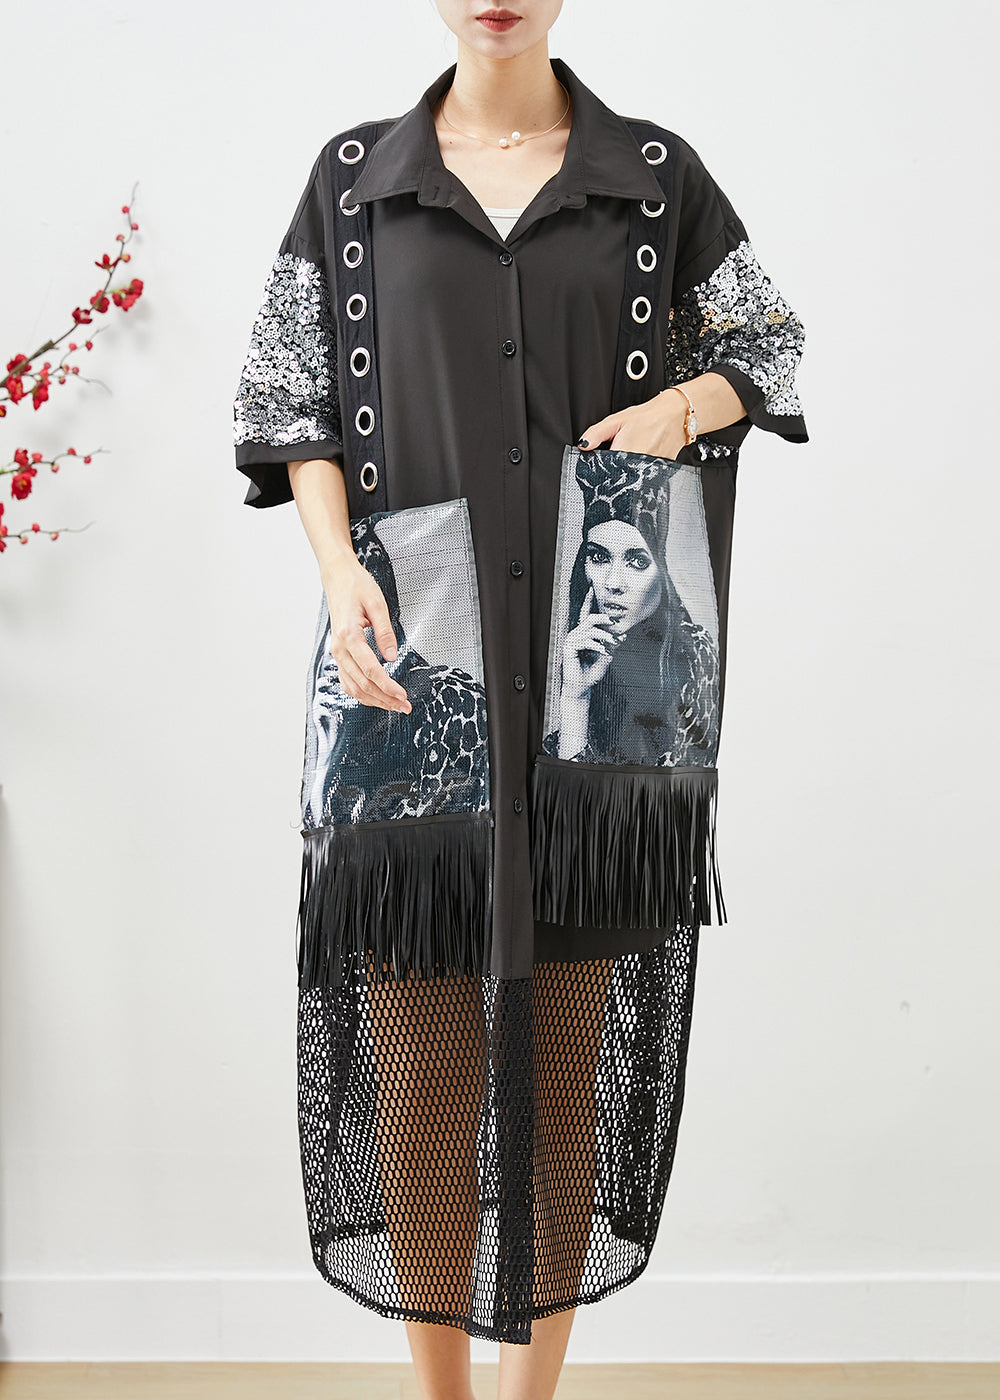 Boho Black Sequins Patchwork Hollow Out Tasseled Maxi Dresses Fall